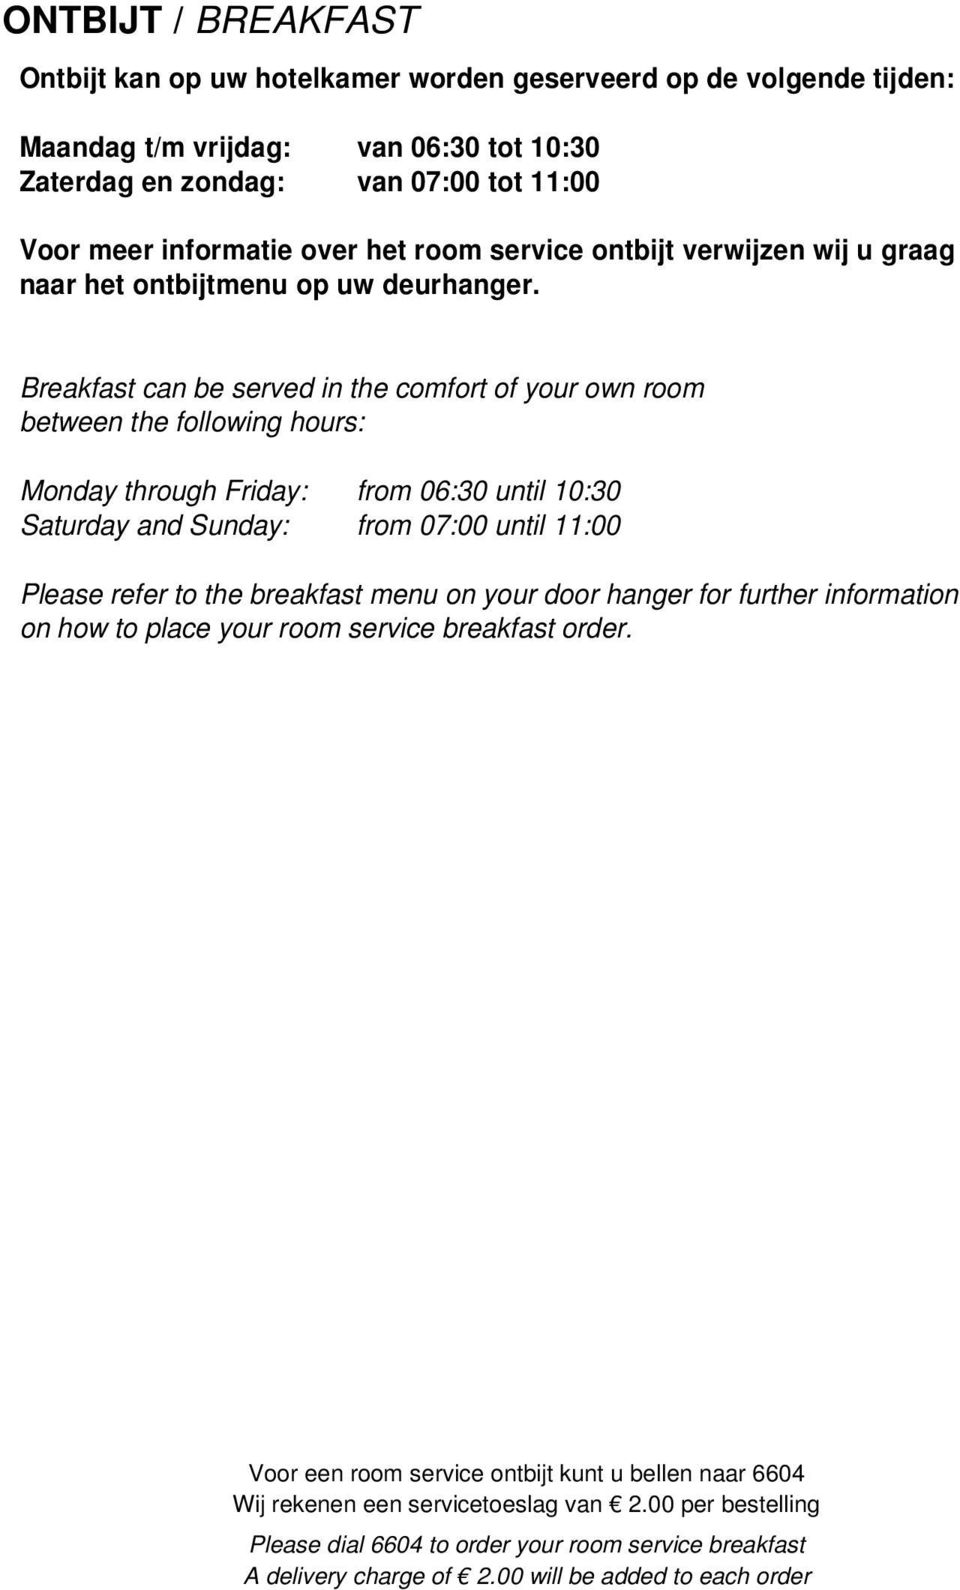 Breakfast can be served in the comfort of your own room between the following hours: Monday through Friday: Saturday and Sunday: from 06:30 until 10:30 from 07:00 until 11:00 Please refer to the